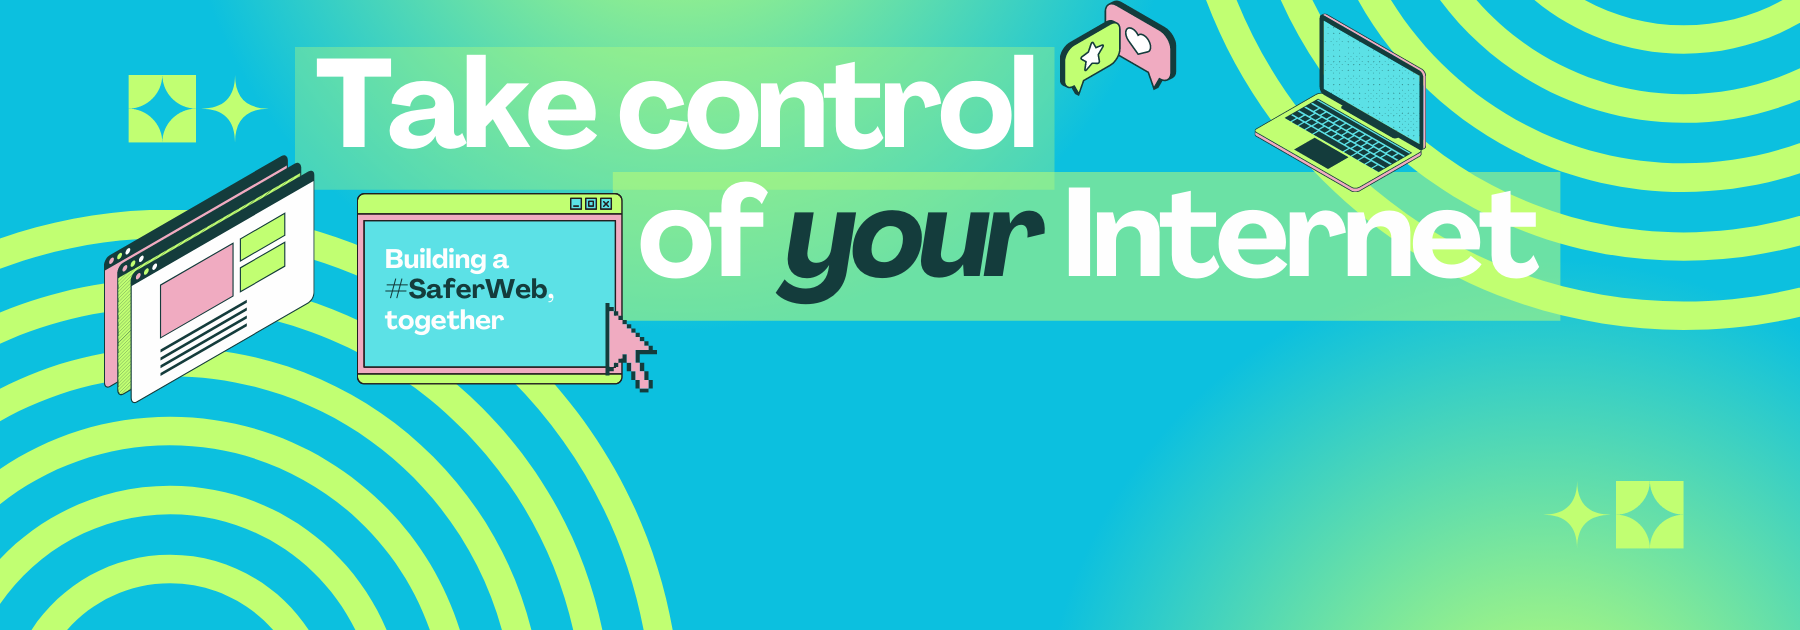 take control of your internet